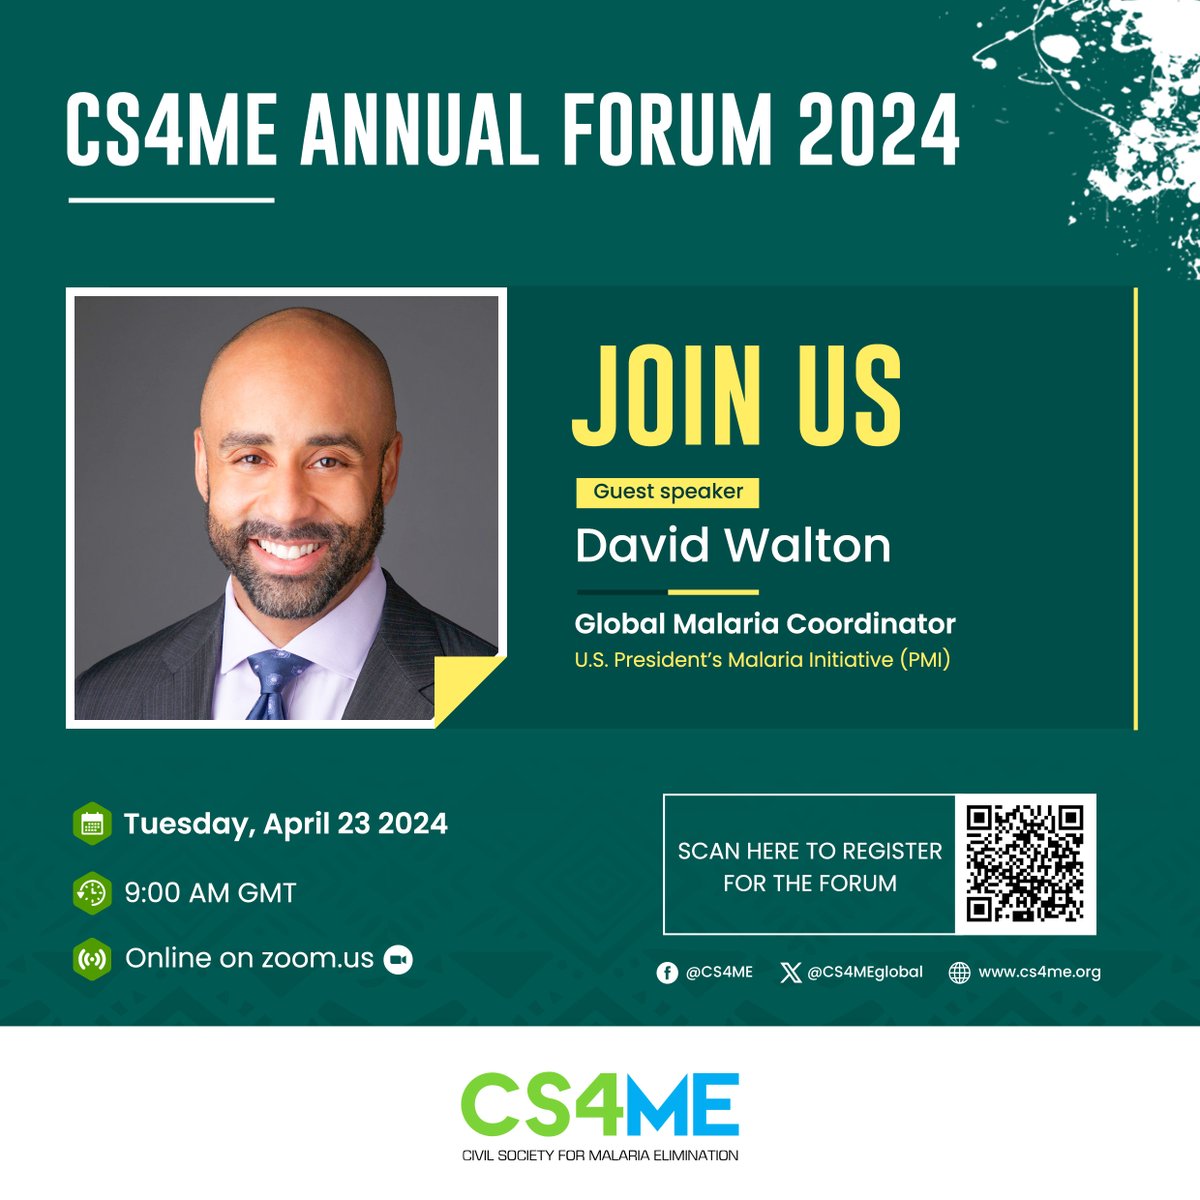 📢 Only 01 Hour left for the #CS4ME Annual Forum 2024. You can still register and be part of the discussions : us02web.zoom.us/webinar/regist… Let's talk about Health, Equity, Gender and Human Rights in the fight against #Malaria #EndMalaria